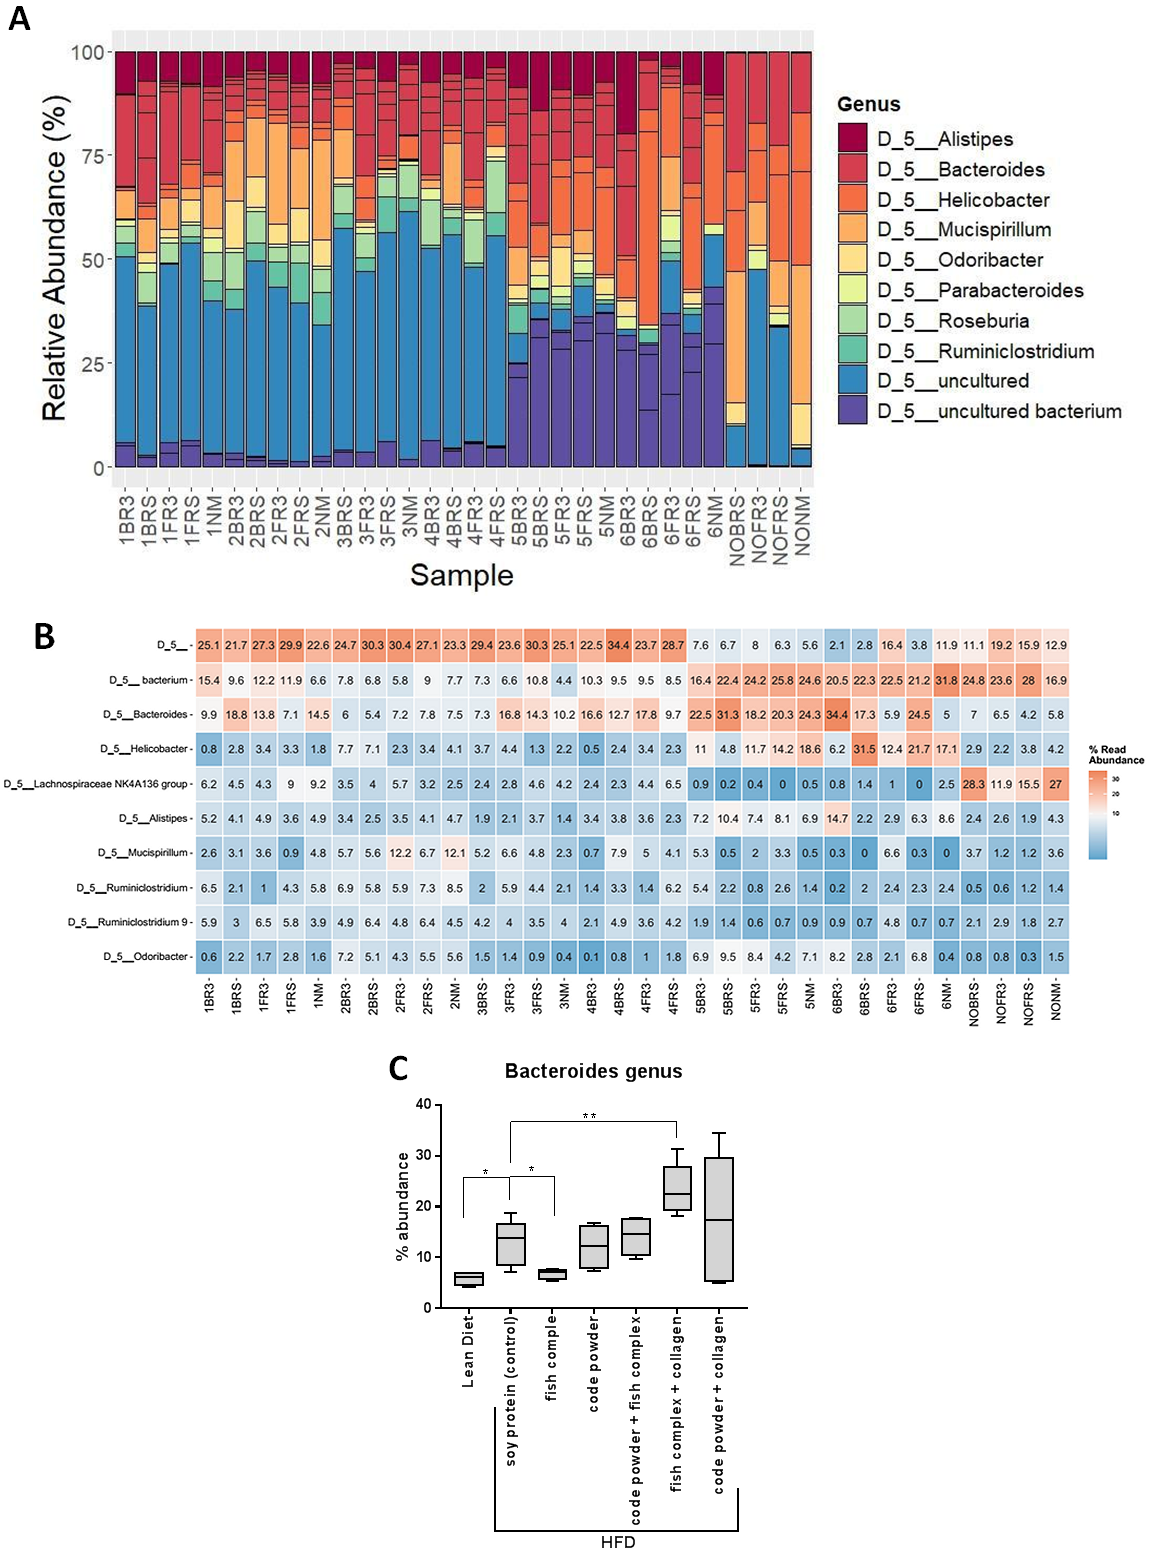 Figure 2.6.2 Example of sequencing data analysis pipeline. A. Stacked bar chart of 10 top abundant genera. B. Heatmap of 10 top genera. C. Box plot of genus of interest with differences among nutritional supplements.